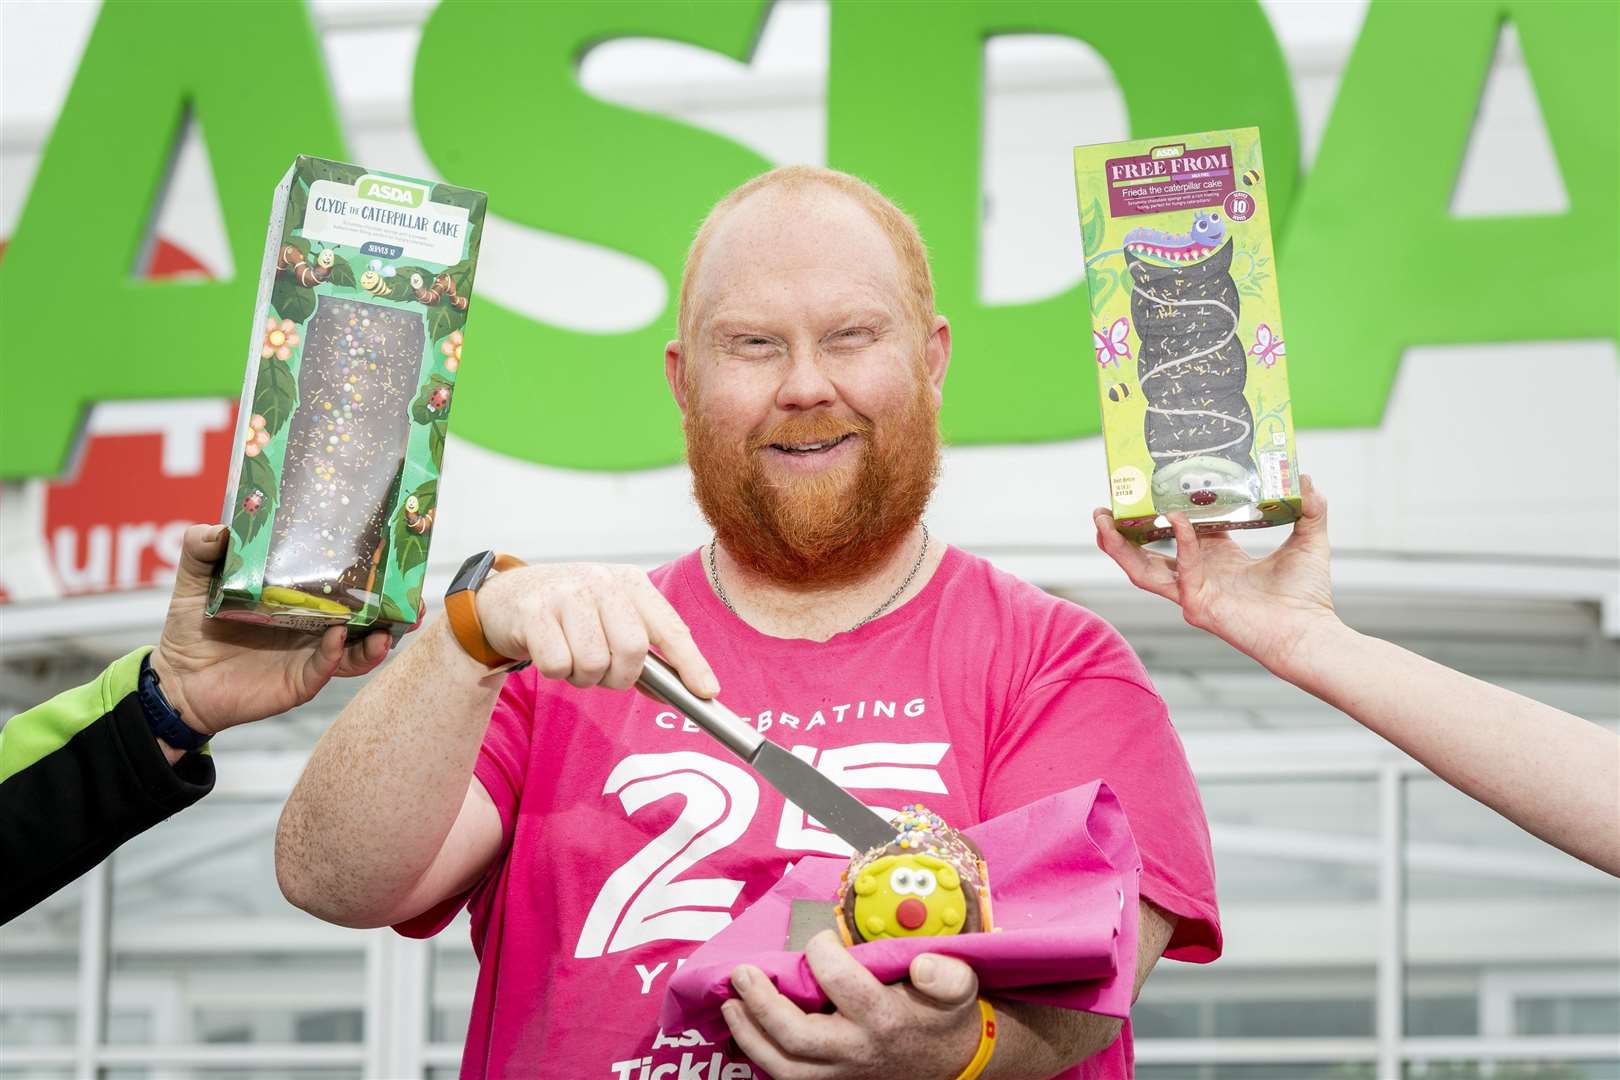 Supporting the campaign is Asda Community Champion at the Chesser store in Edinburgh, Gary Anderson.